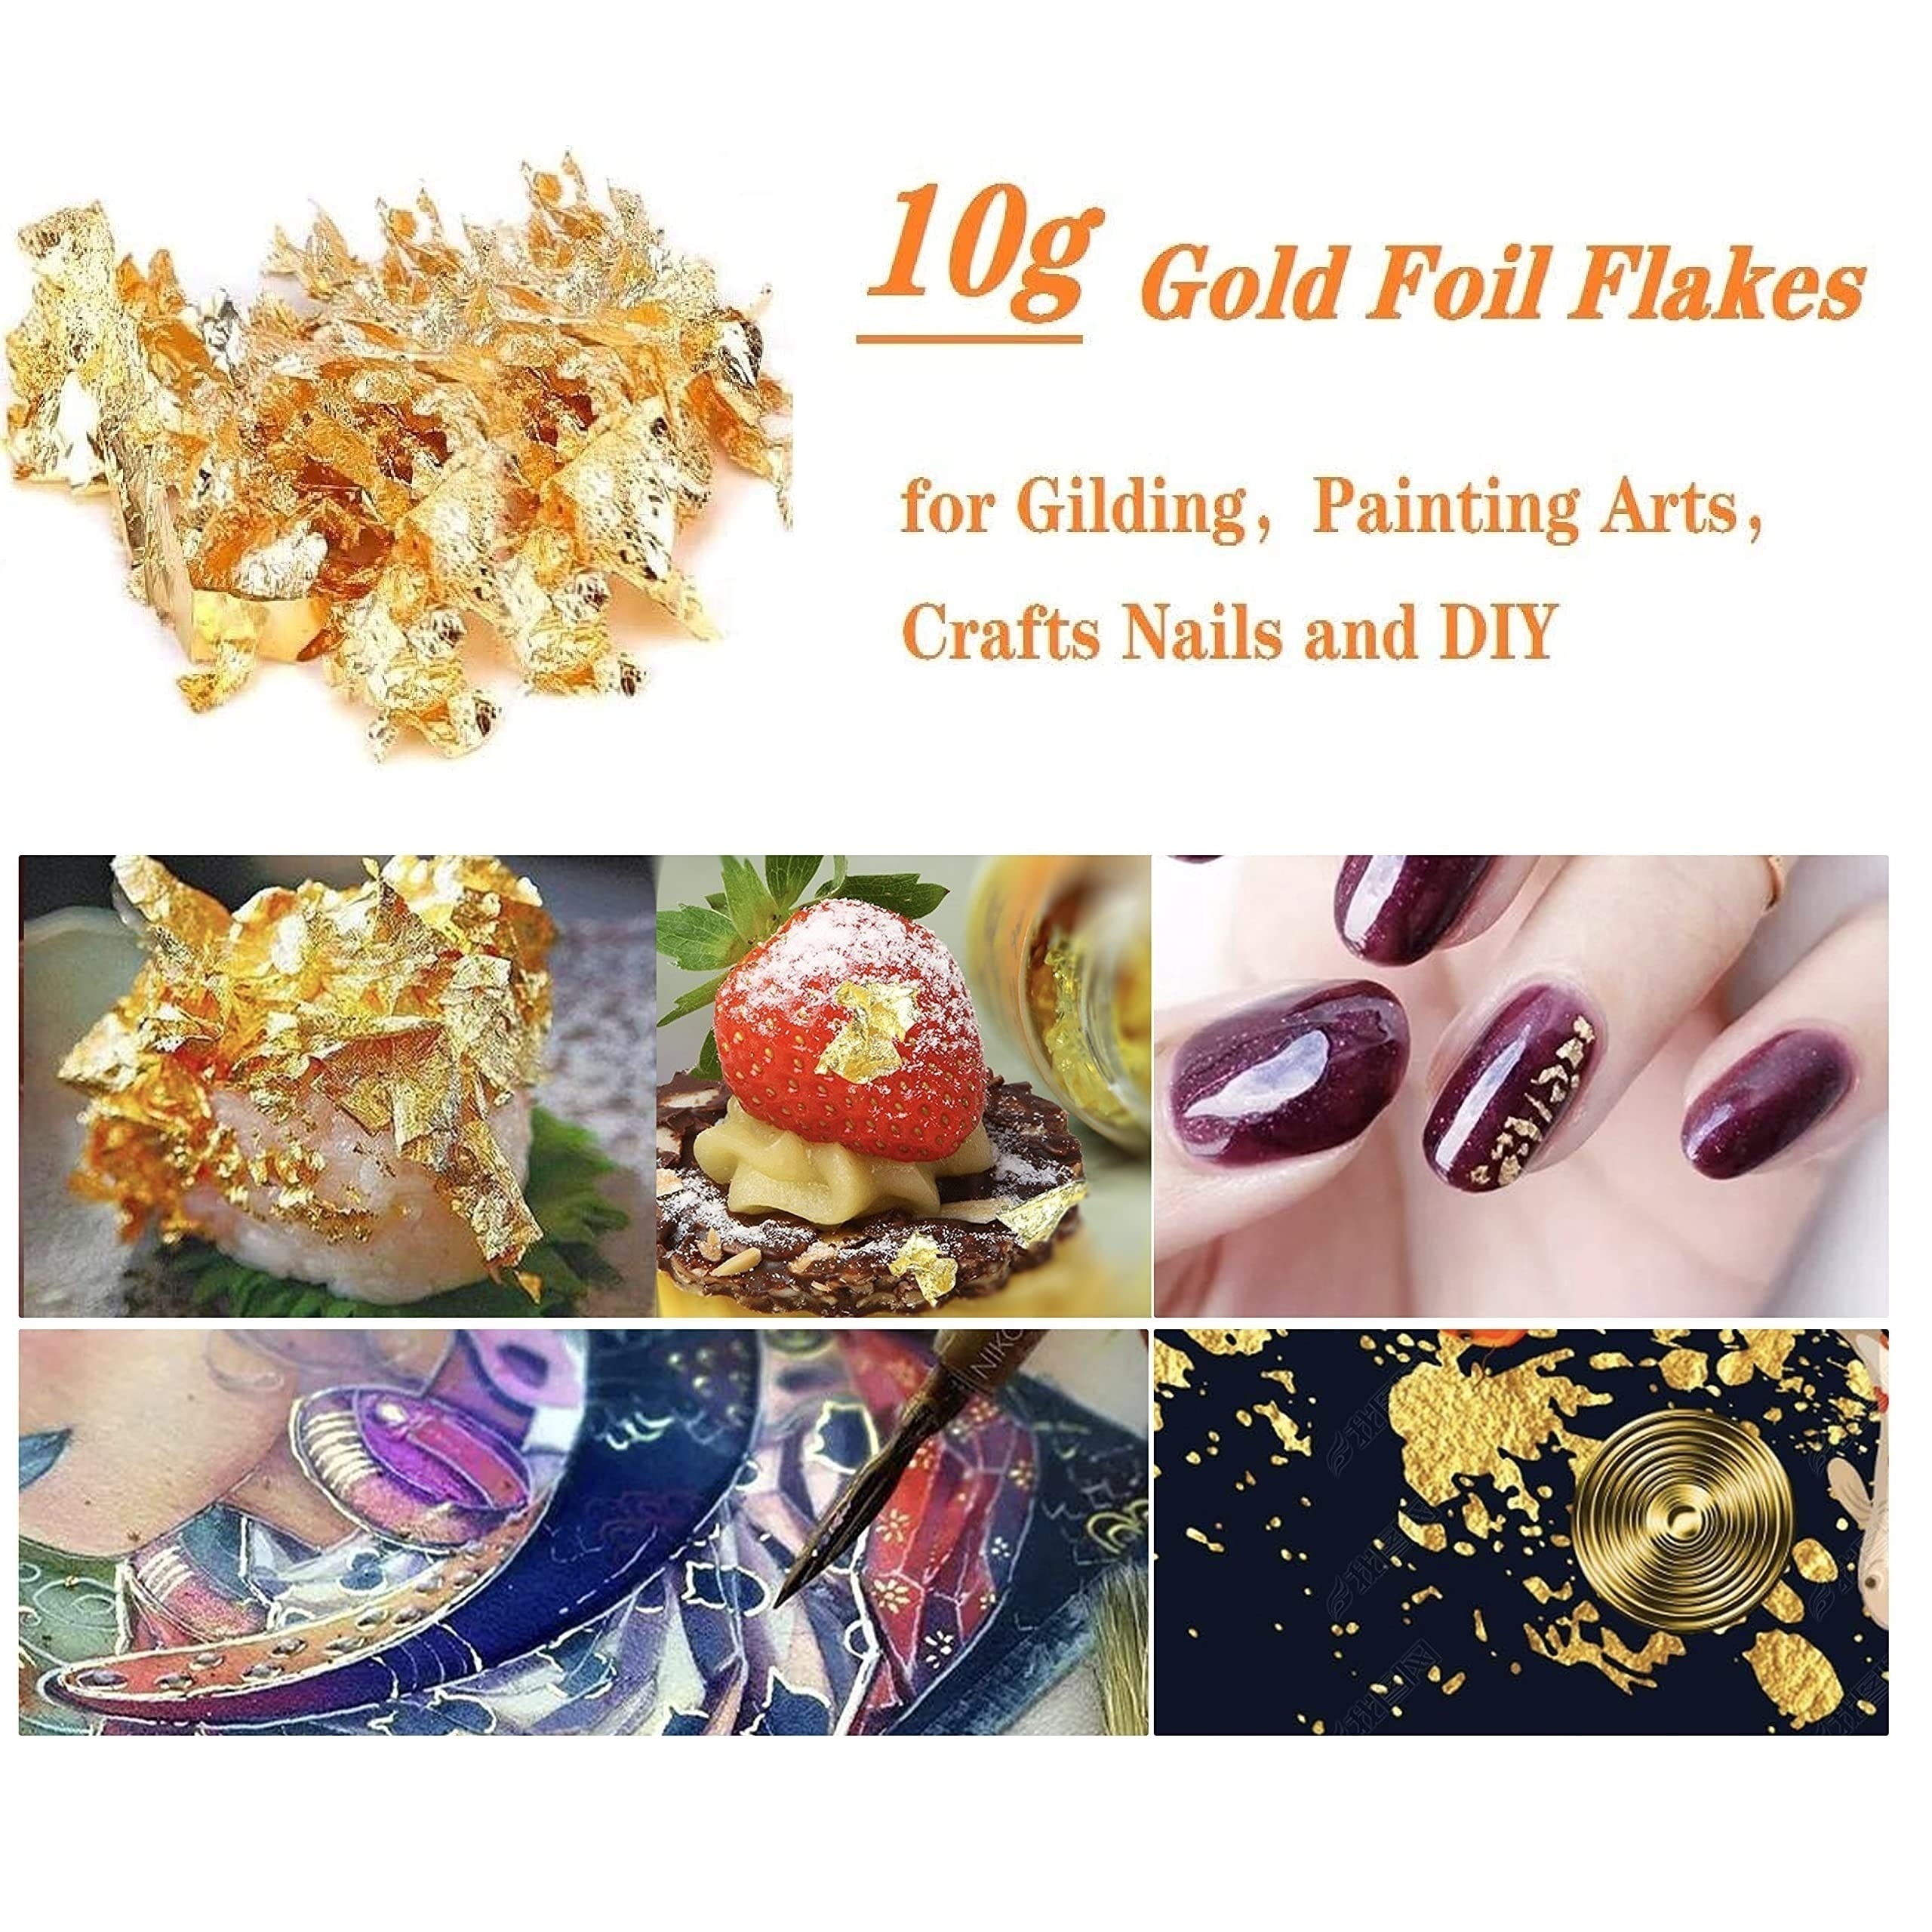 Gold Foil Flakes for Resin, Paxcoo 10 Grams Gold Foil Flakes Imitation  Metallic Leaf for Nails, Painting, Crafts, Slime and Resin Jewelry Making  (Gold